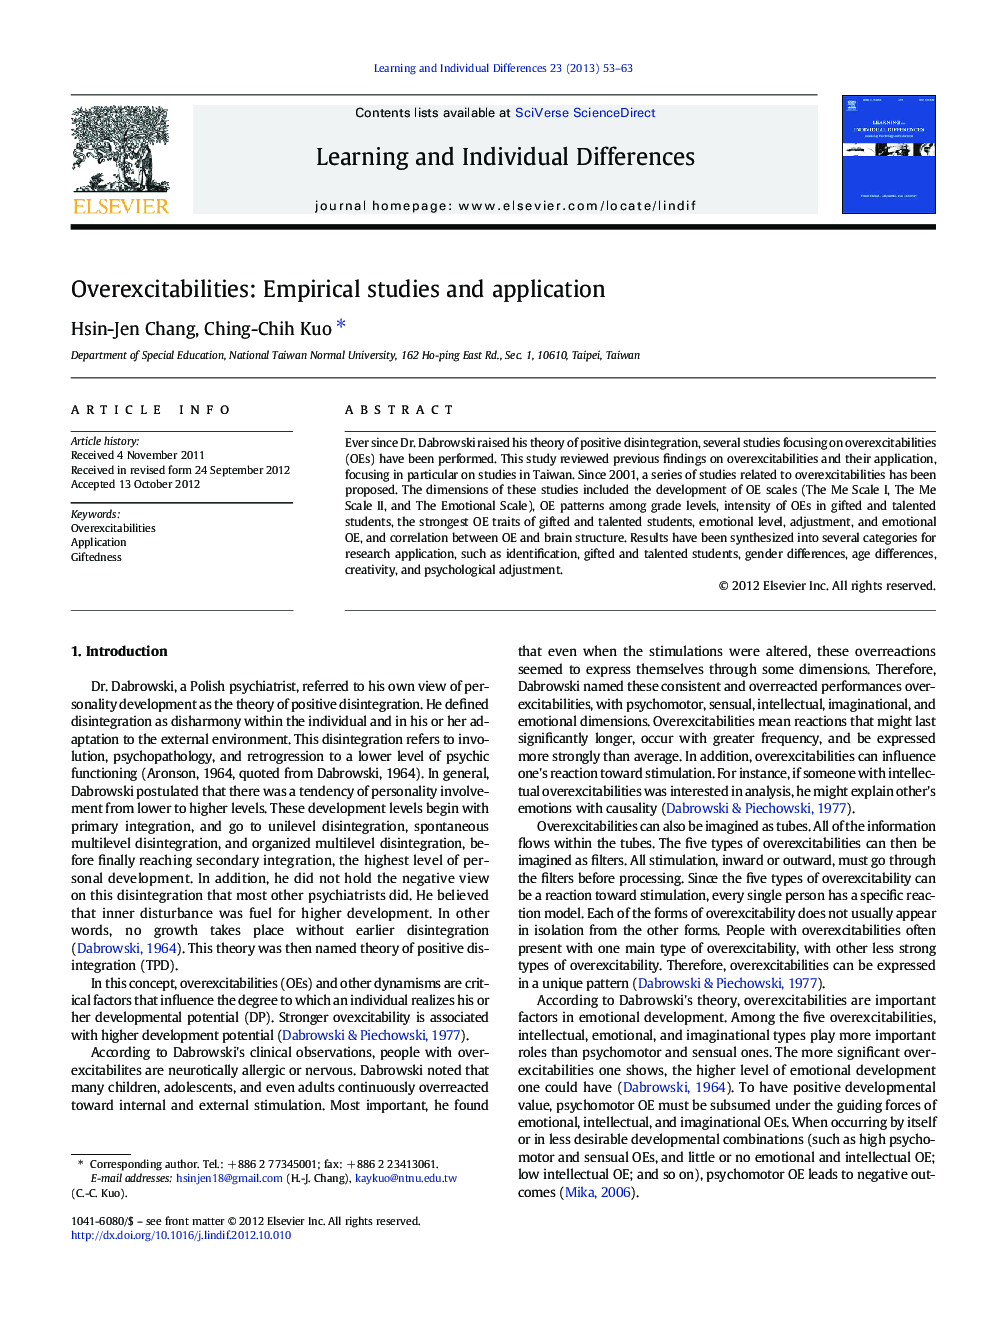 Overexcitabilities: Empirical studies and application